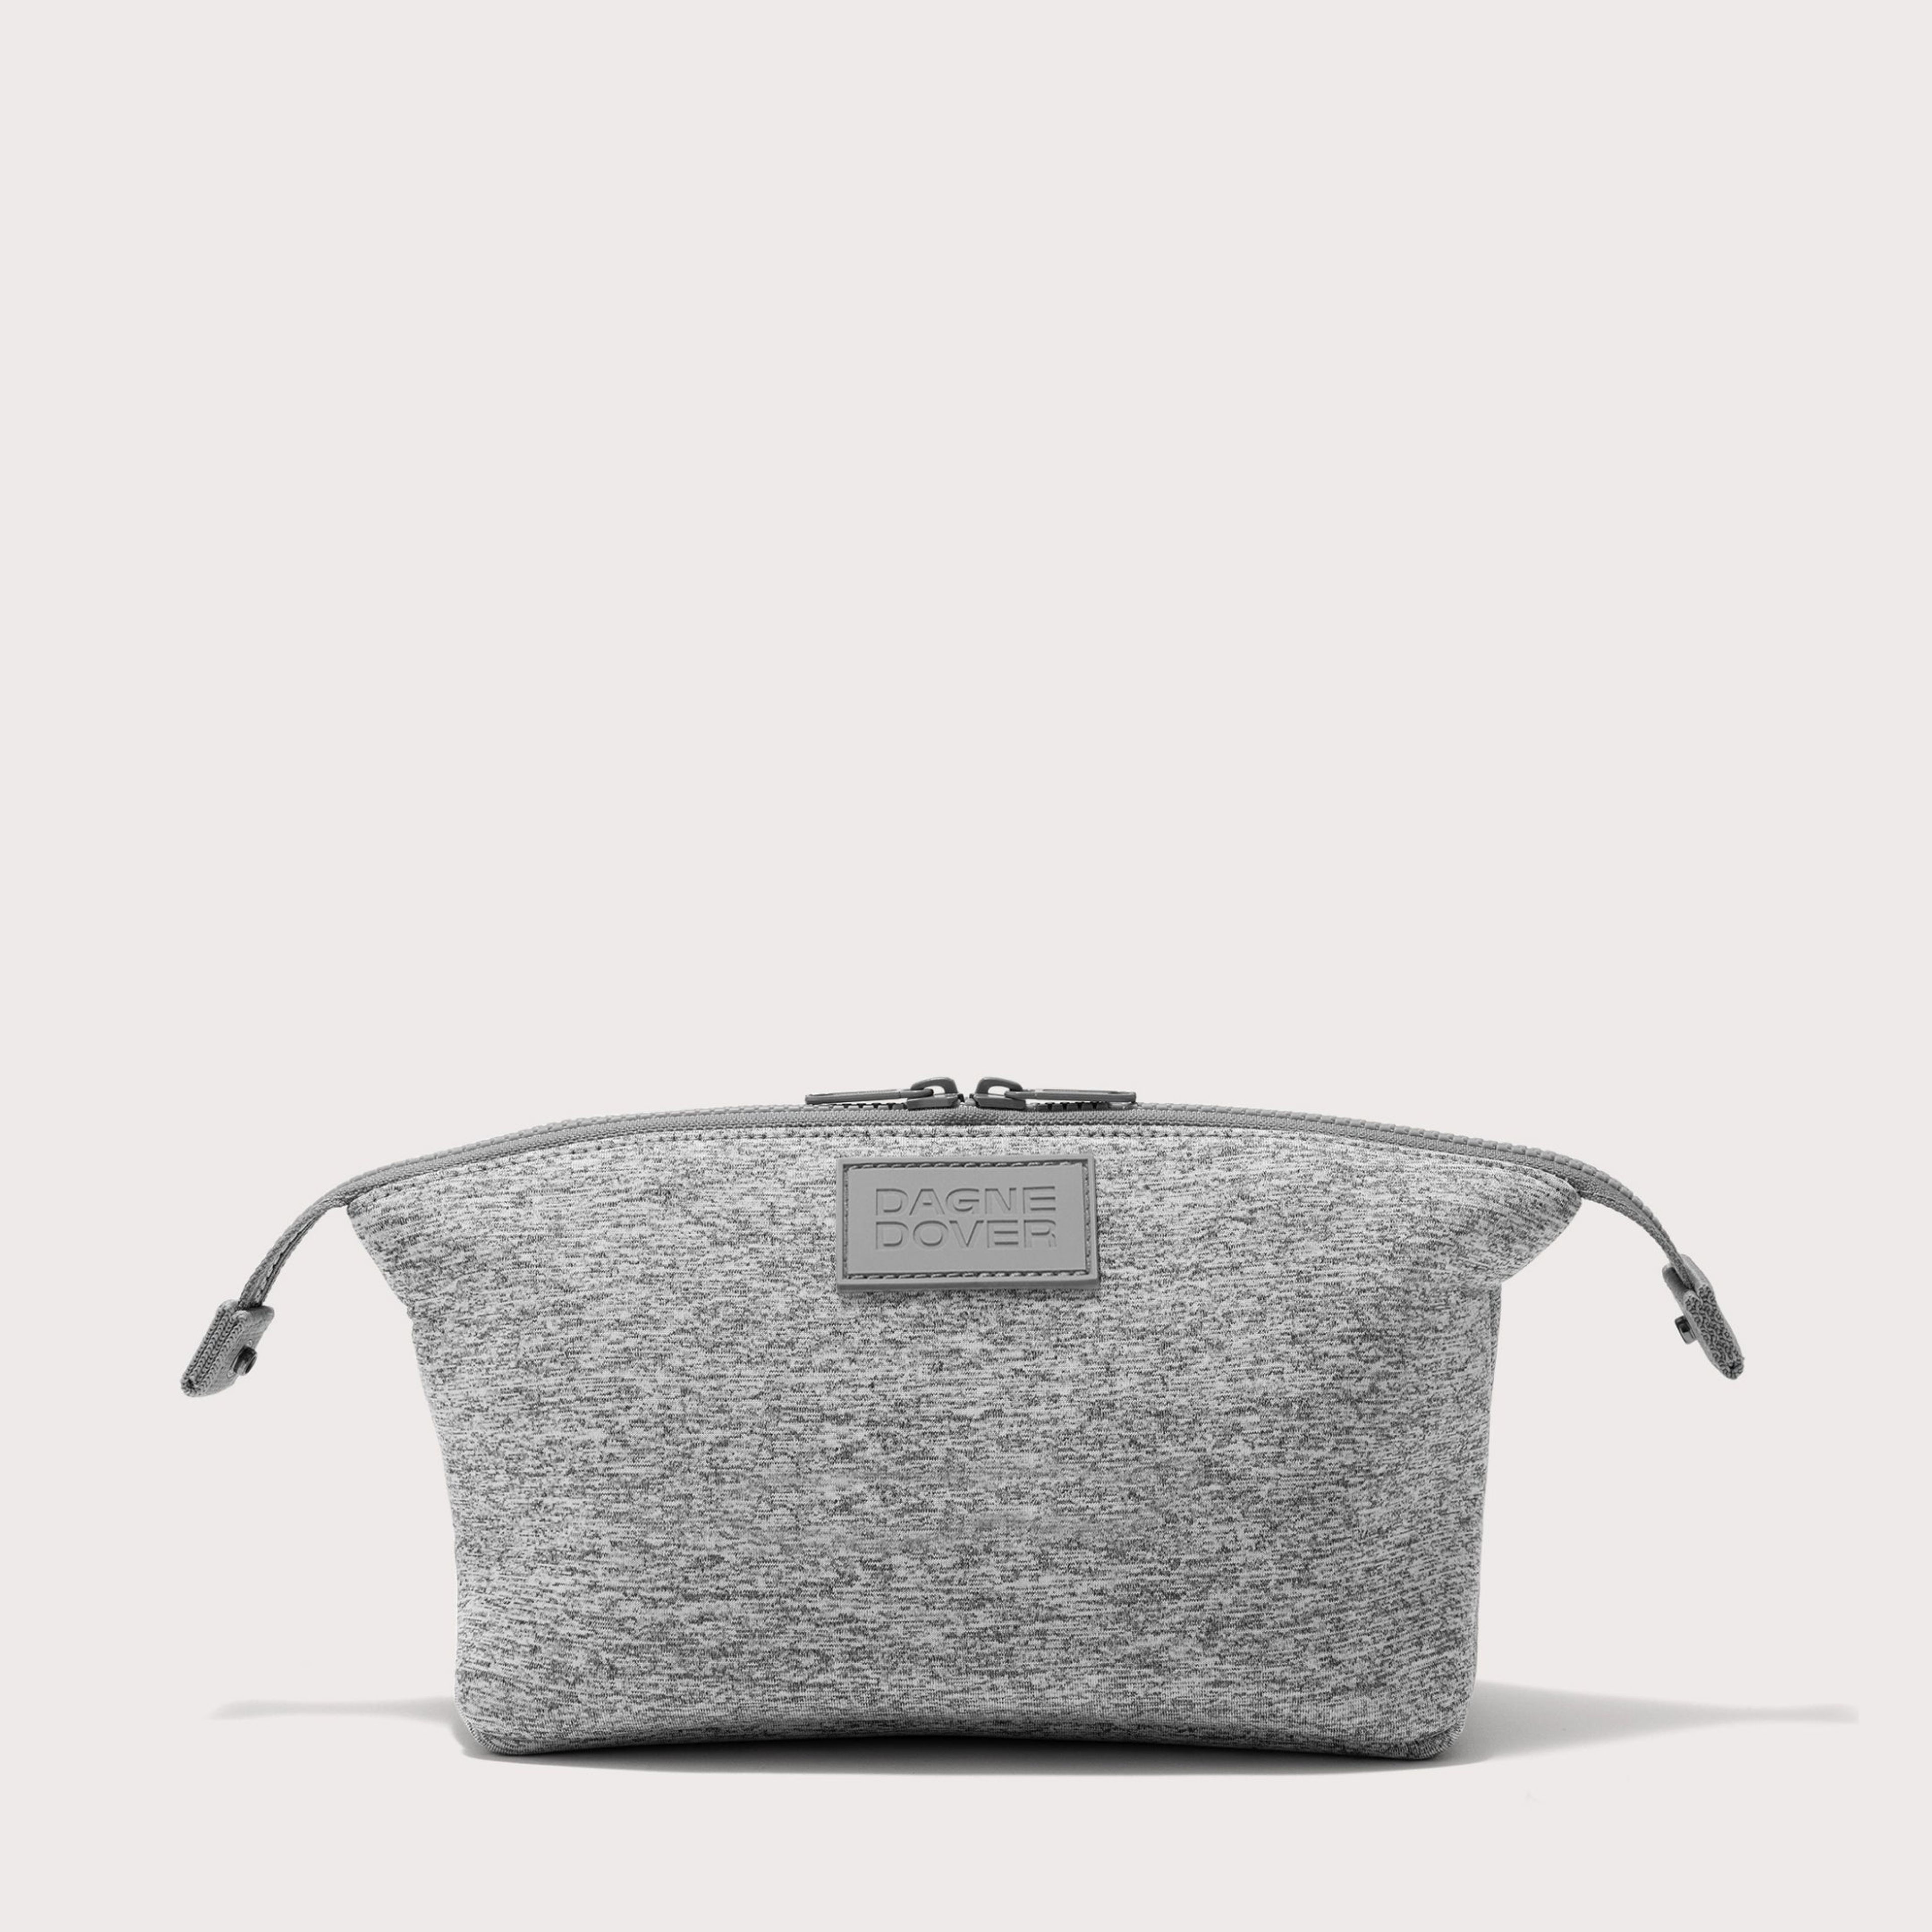 Hunter Toiletry Bag in Heather Grey, Large